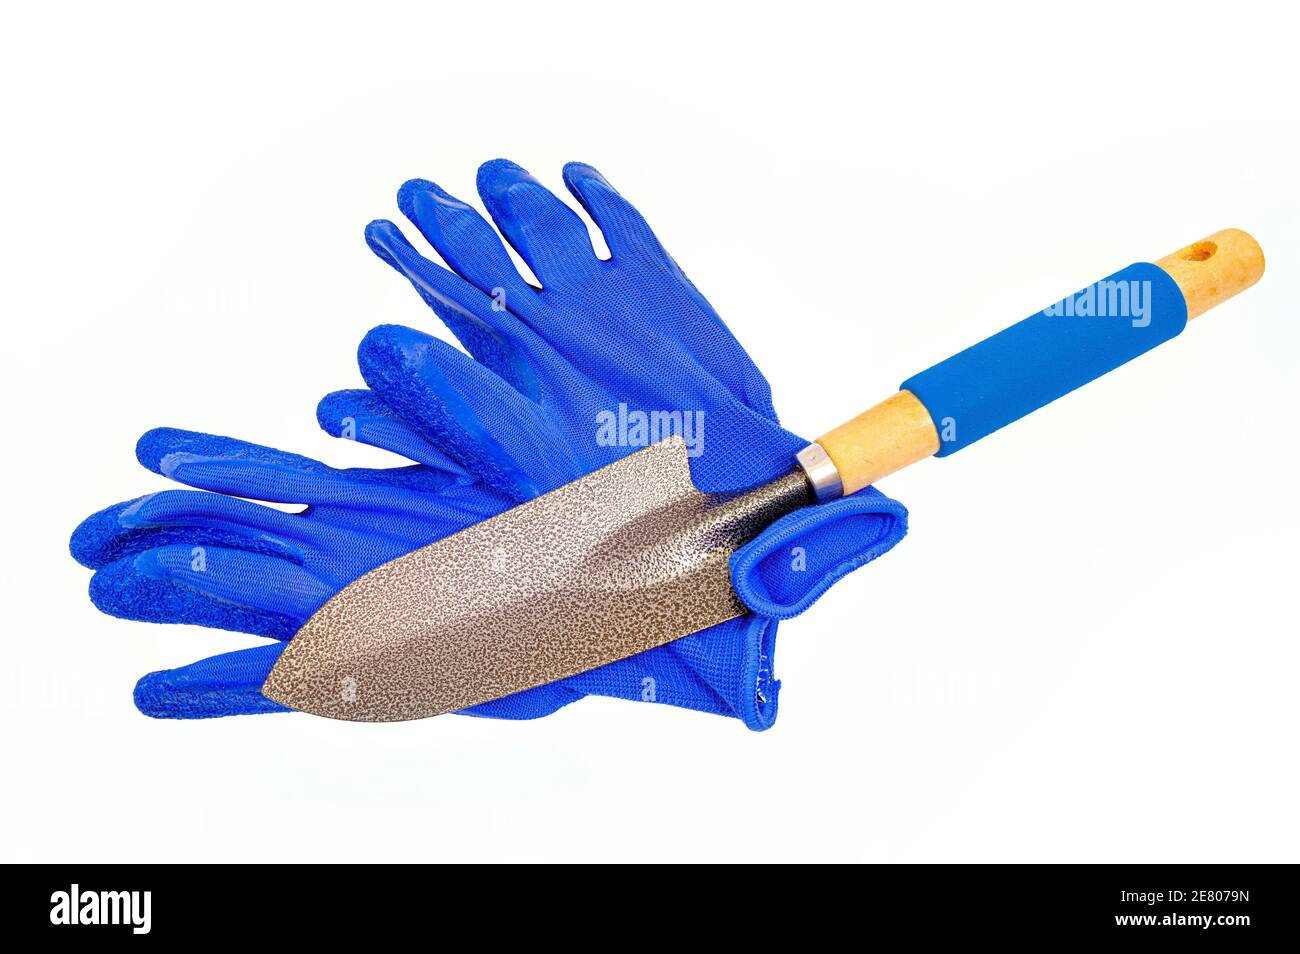 Horizontal shot of blue gardening gloves with a trowel laid across them isolated on white. Stock Photo